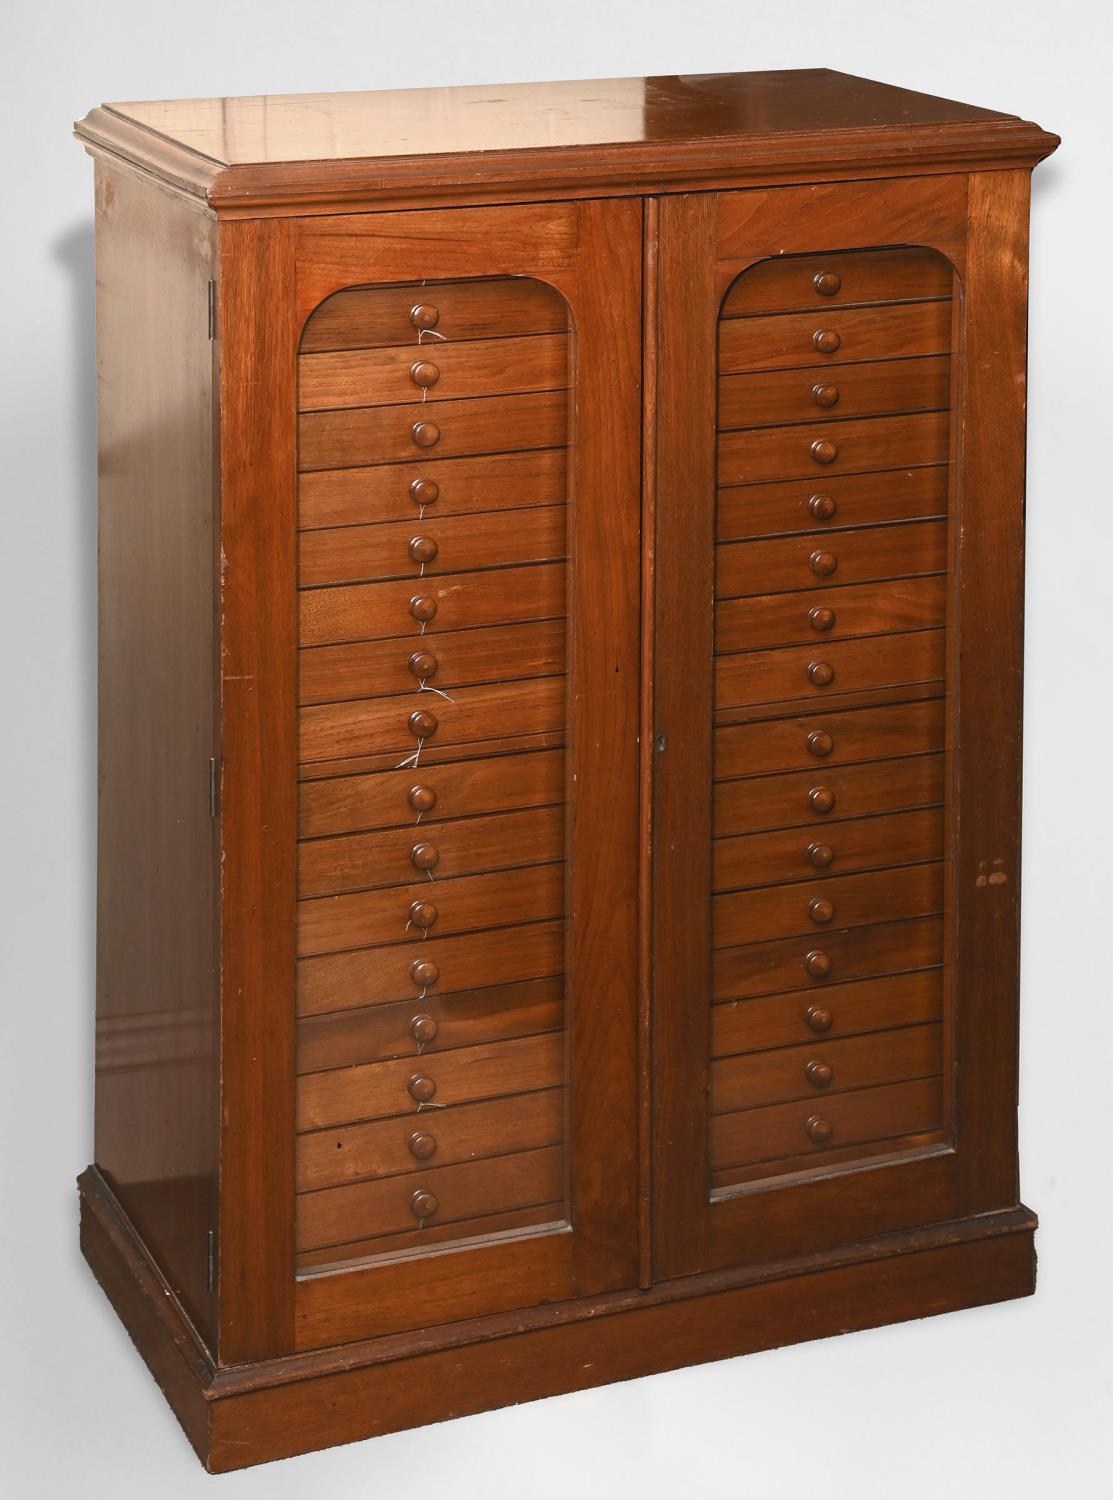 COLLECTORS CABINET BY WATKINS & DONCASTER - BUTTERFLIES & MOTHS a walnut collectors cabinet with